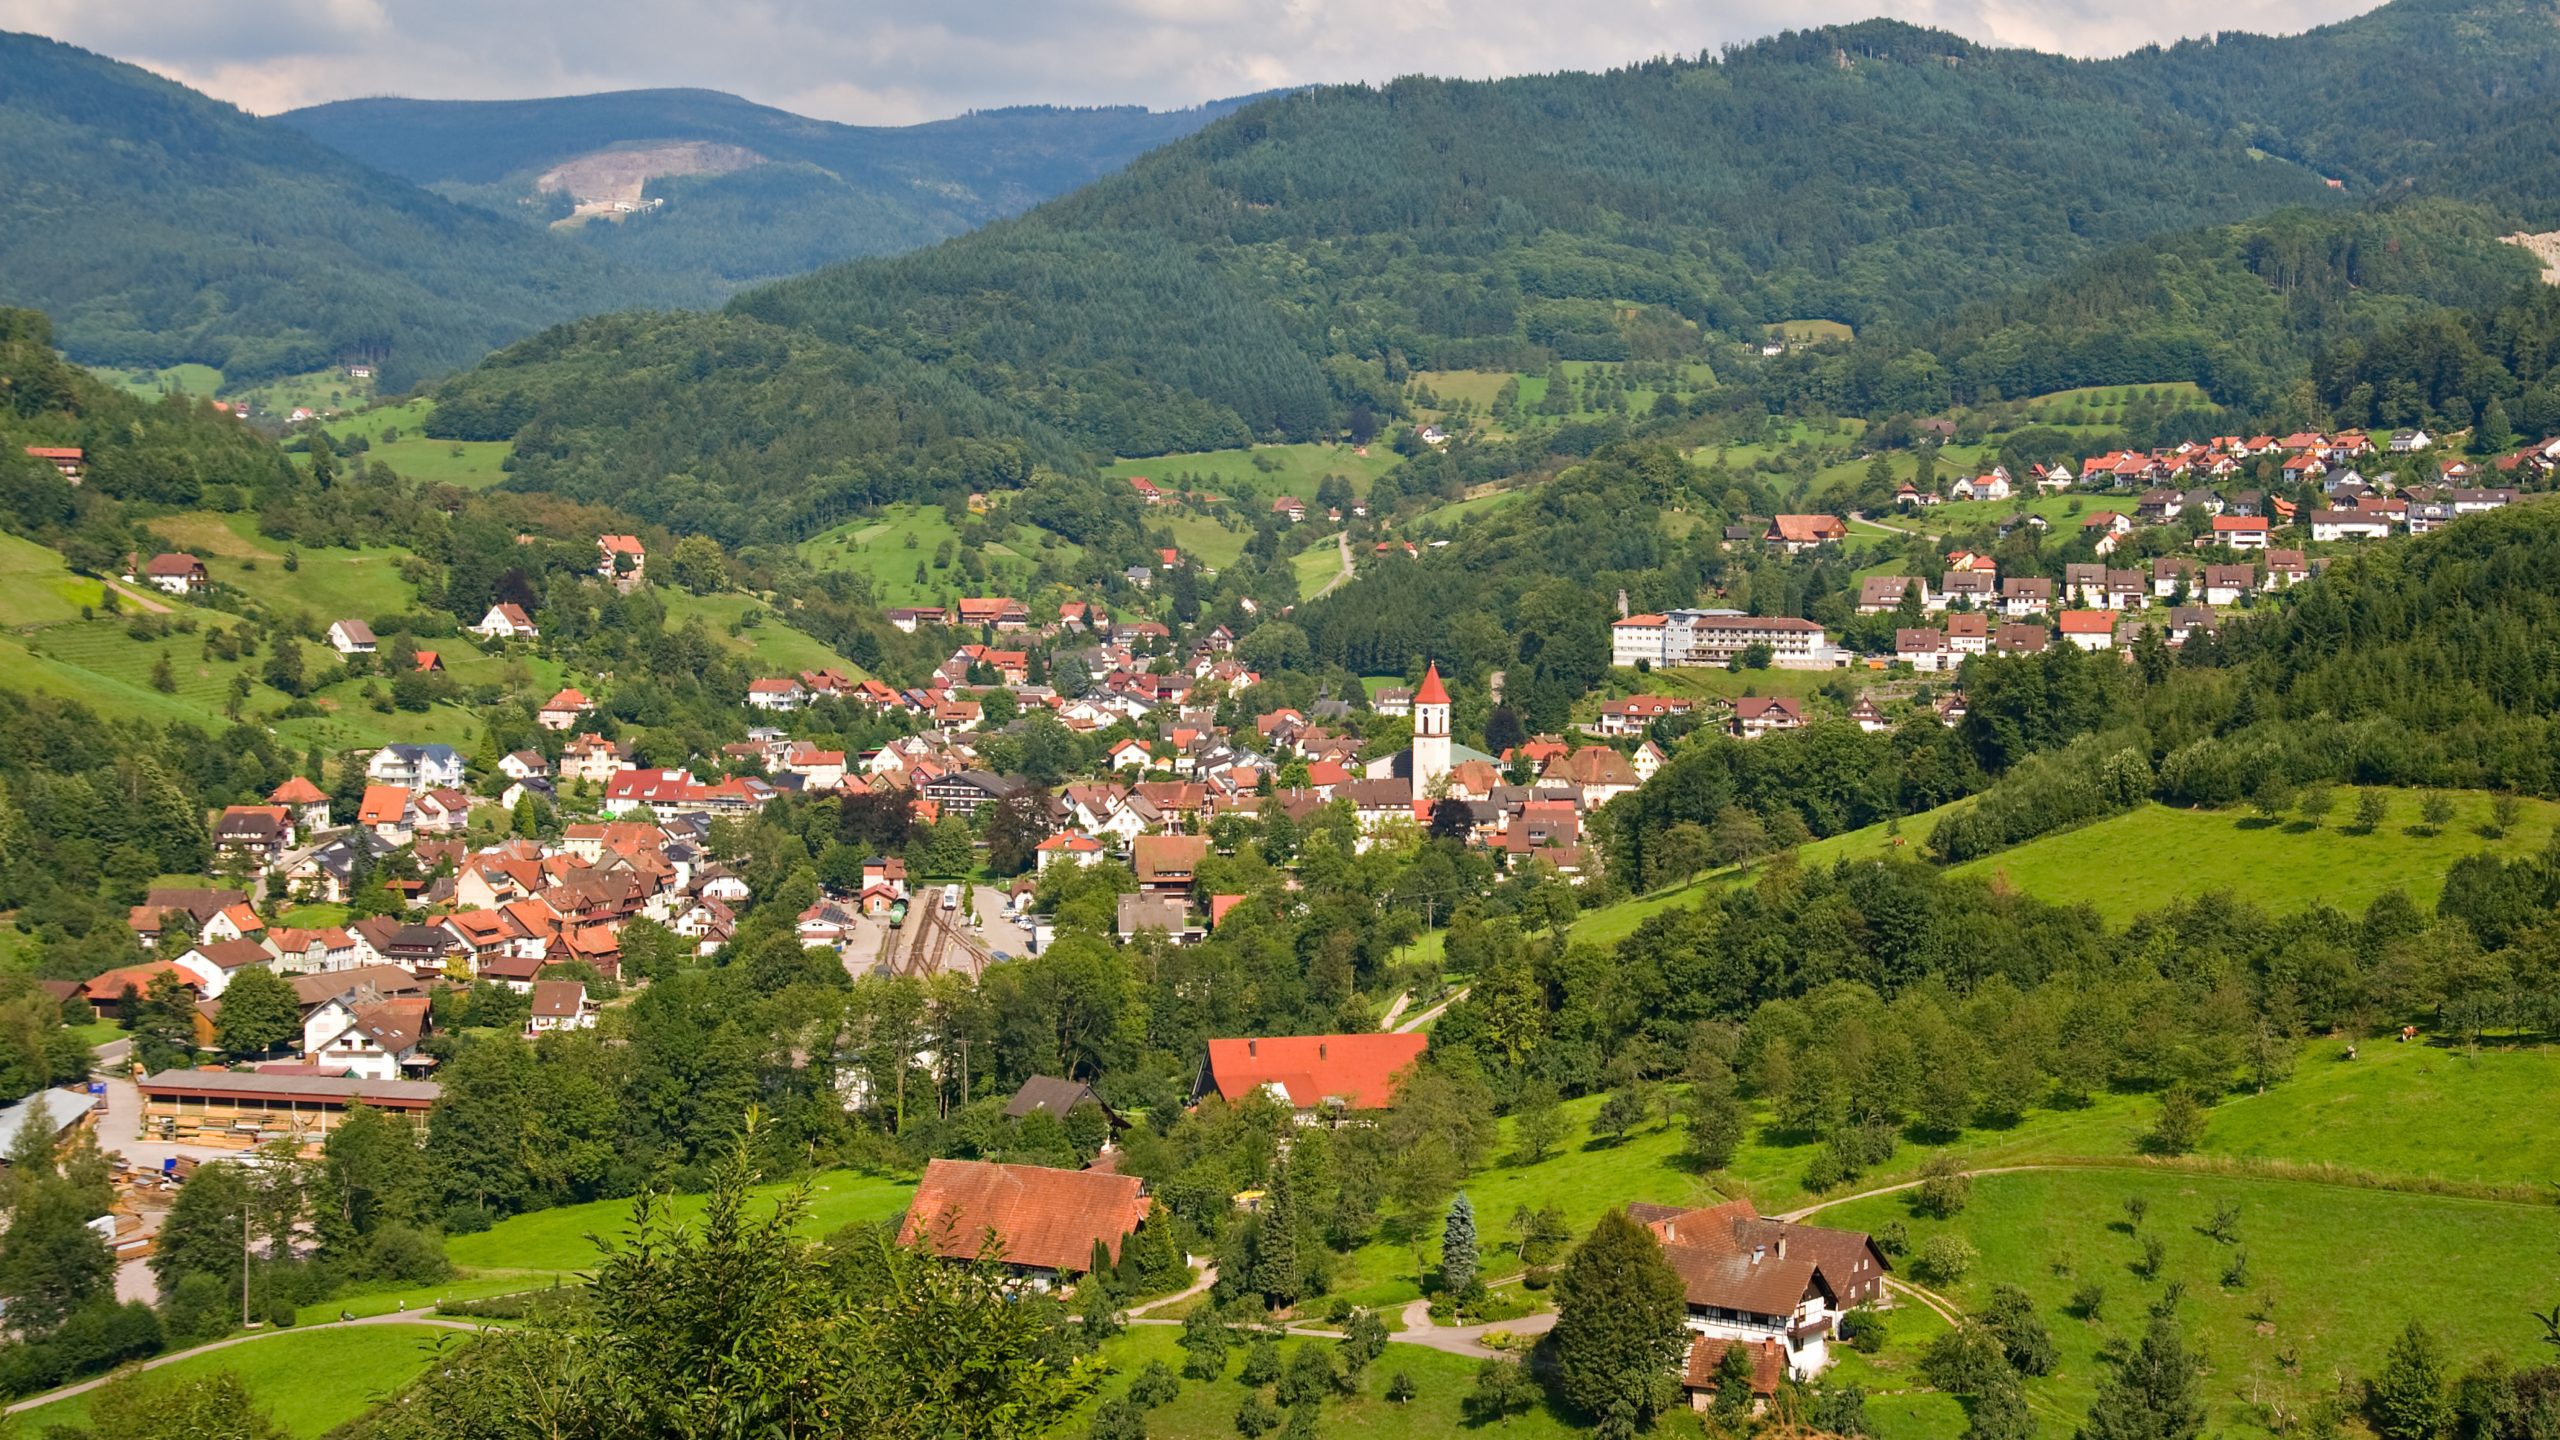 Seventh thing on the list of 10 best things to do in Germany - Explore the Black Forest